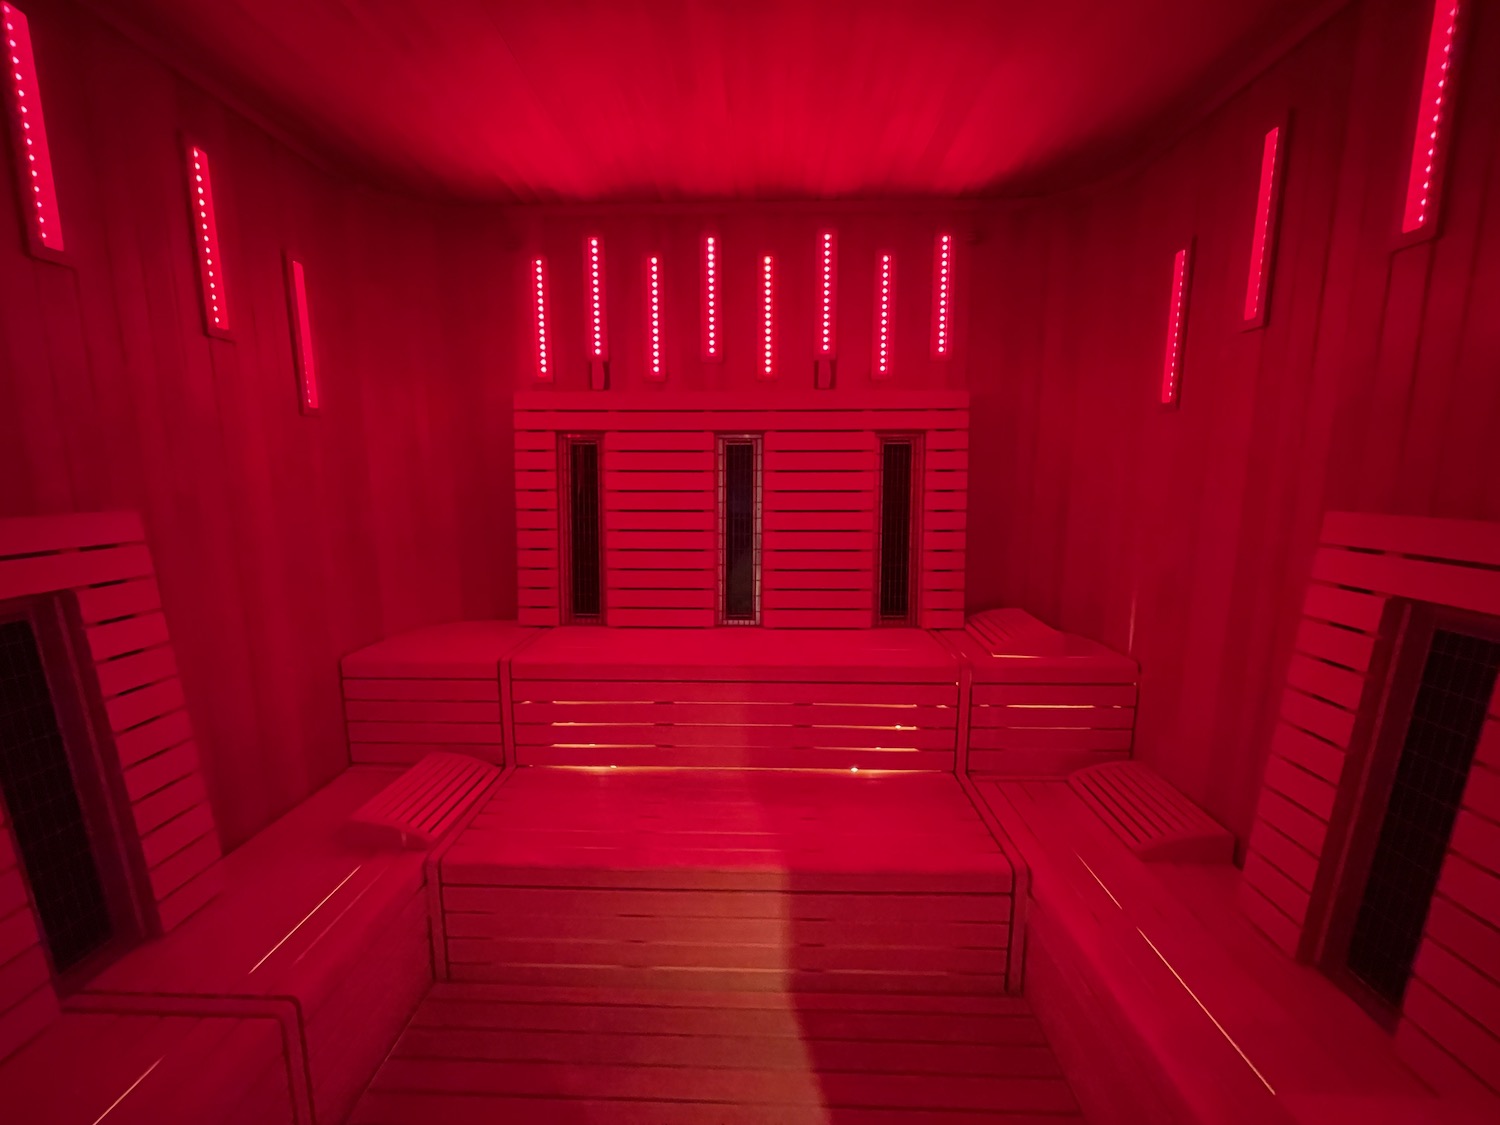 a red room with wooden benches and lights